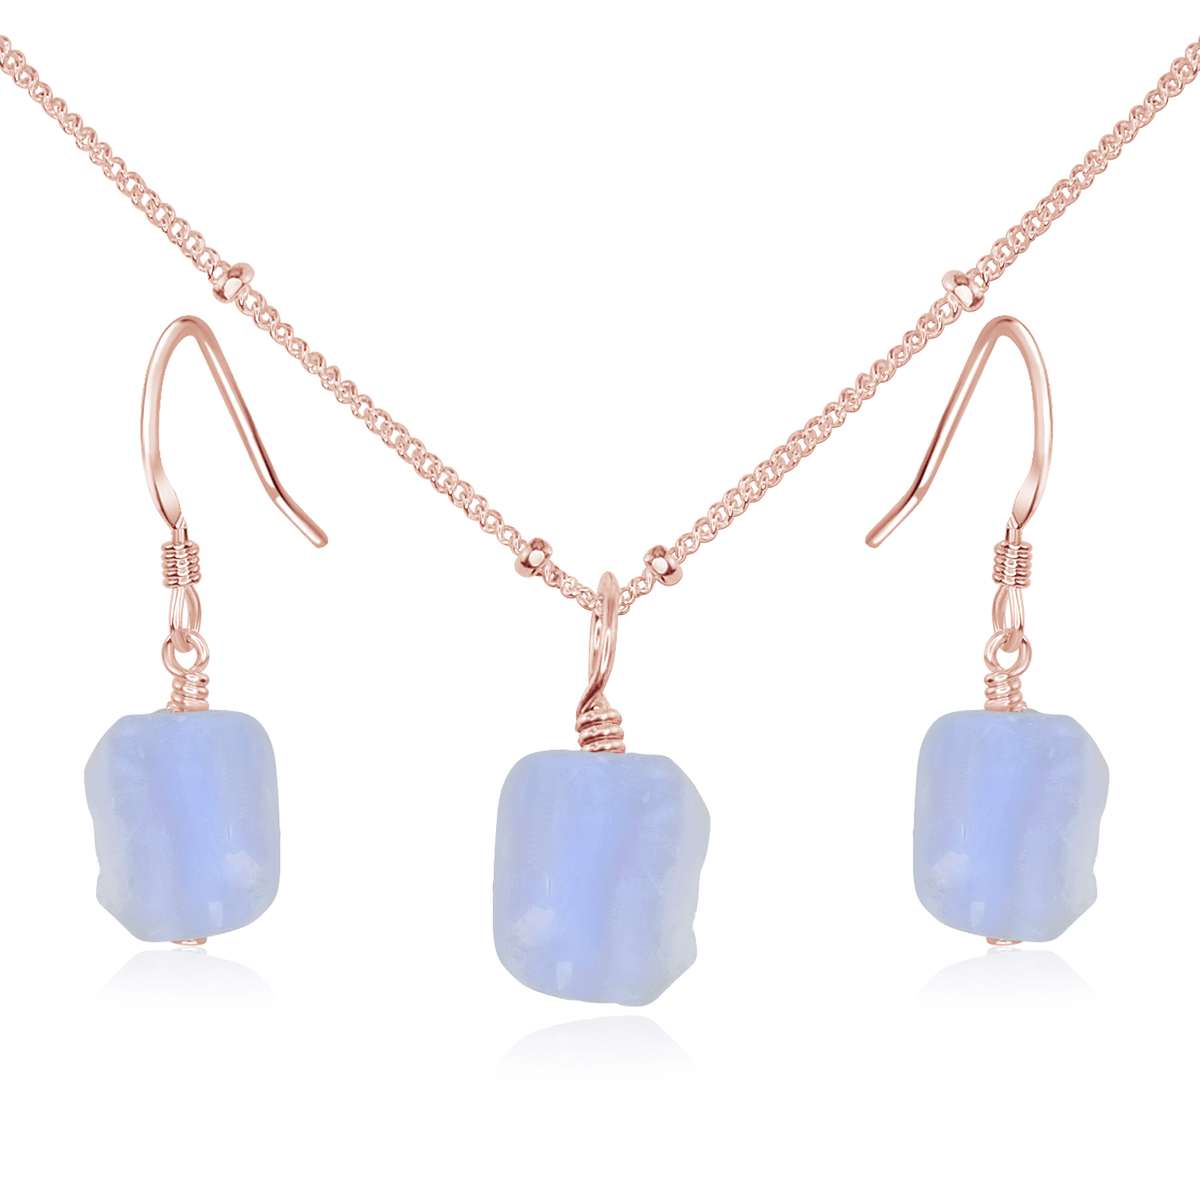 Raw Blue Lace Agate Crystal Earrings & Necklace Set - Raw Blue Lace Agate Crystal Earrings & Necklace Set - 14k Rose Gold Fill / Satellite - Luna Tide Handmade Crystal Jewellery